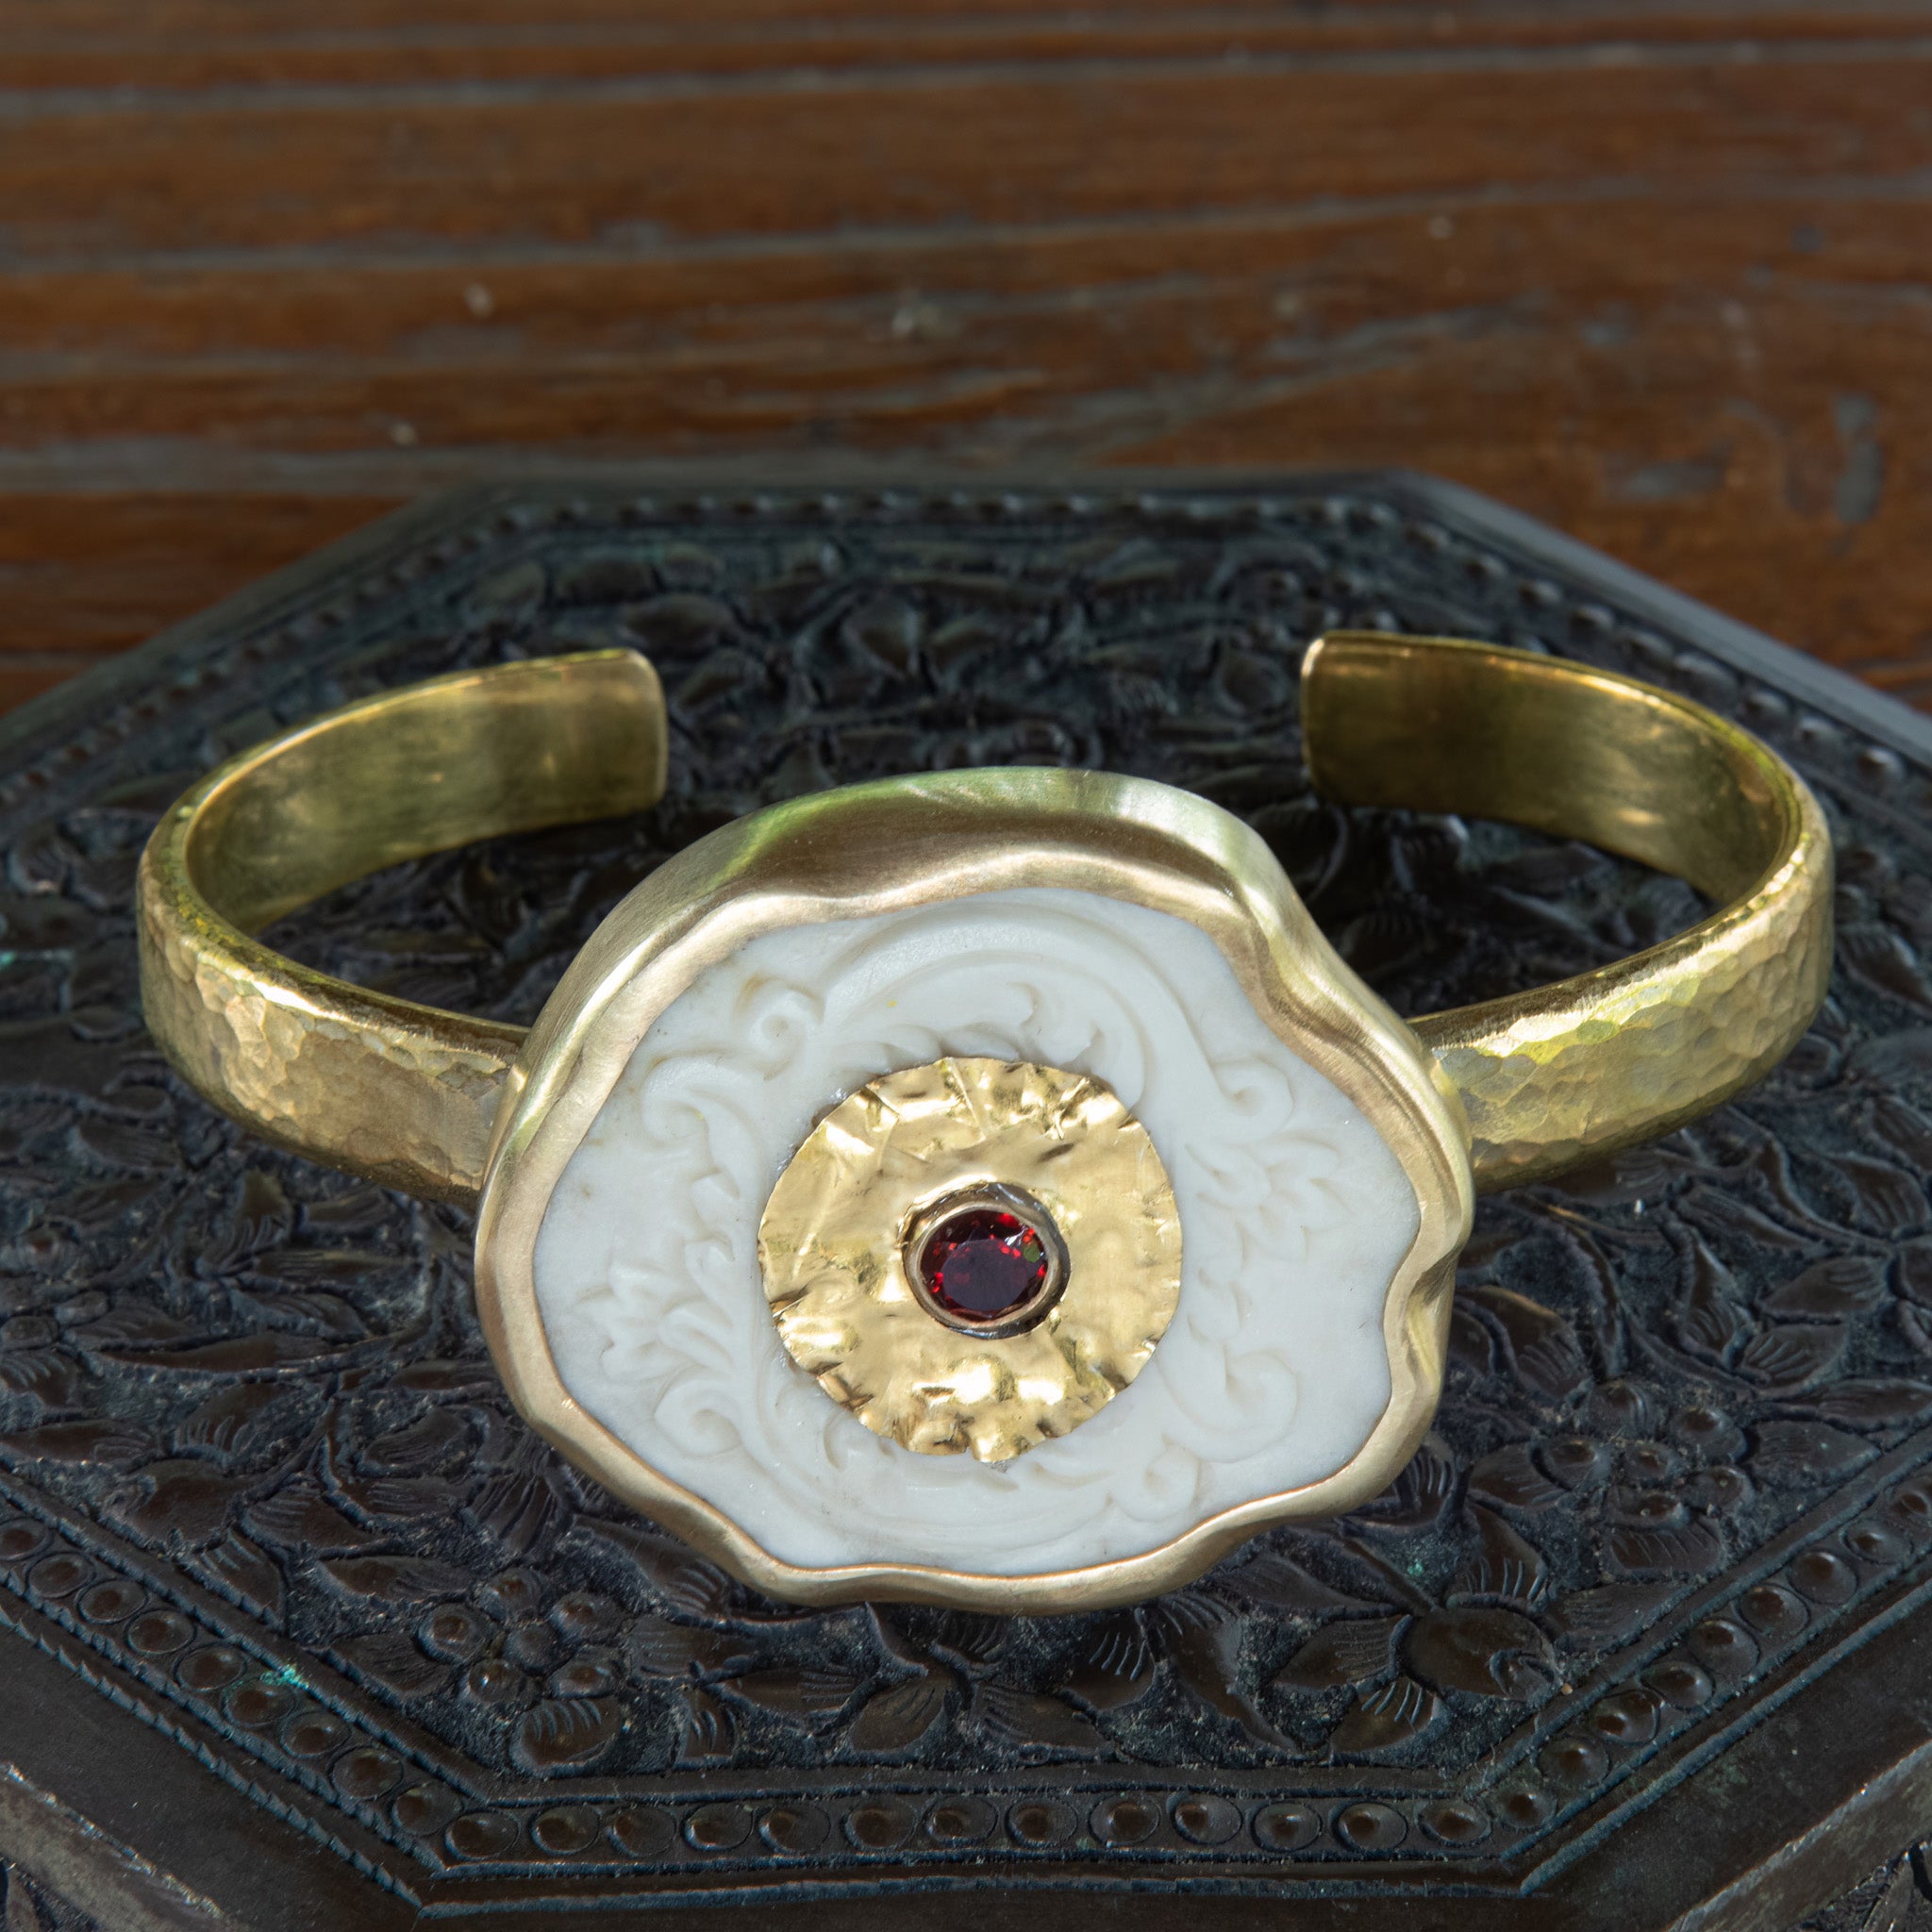 NEW ARRIVAL! Antler and Garnet Cuff 2.0